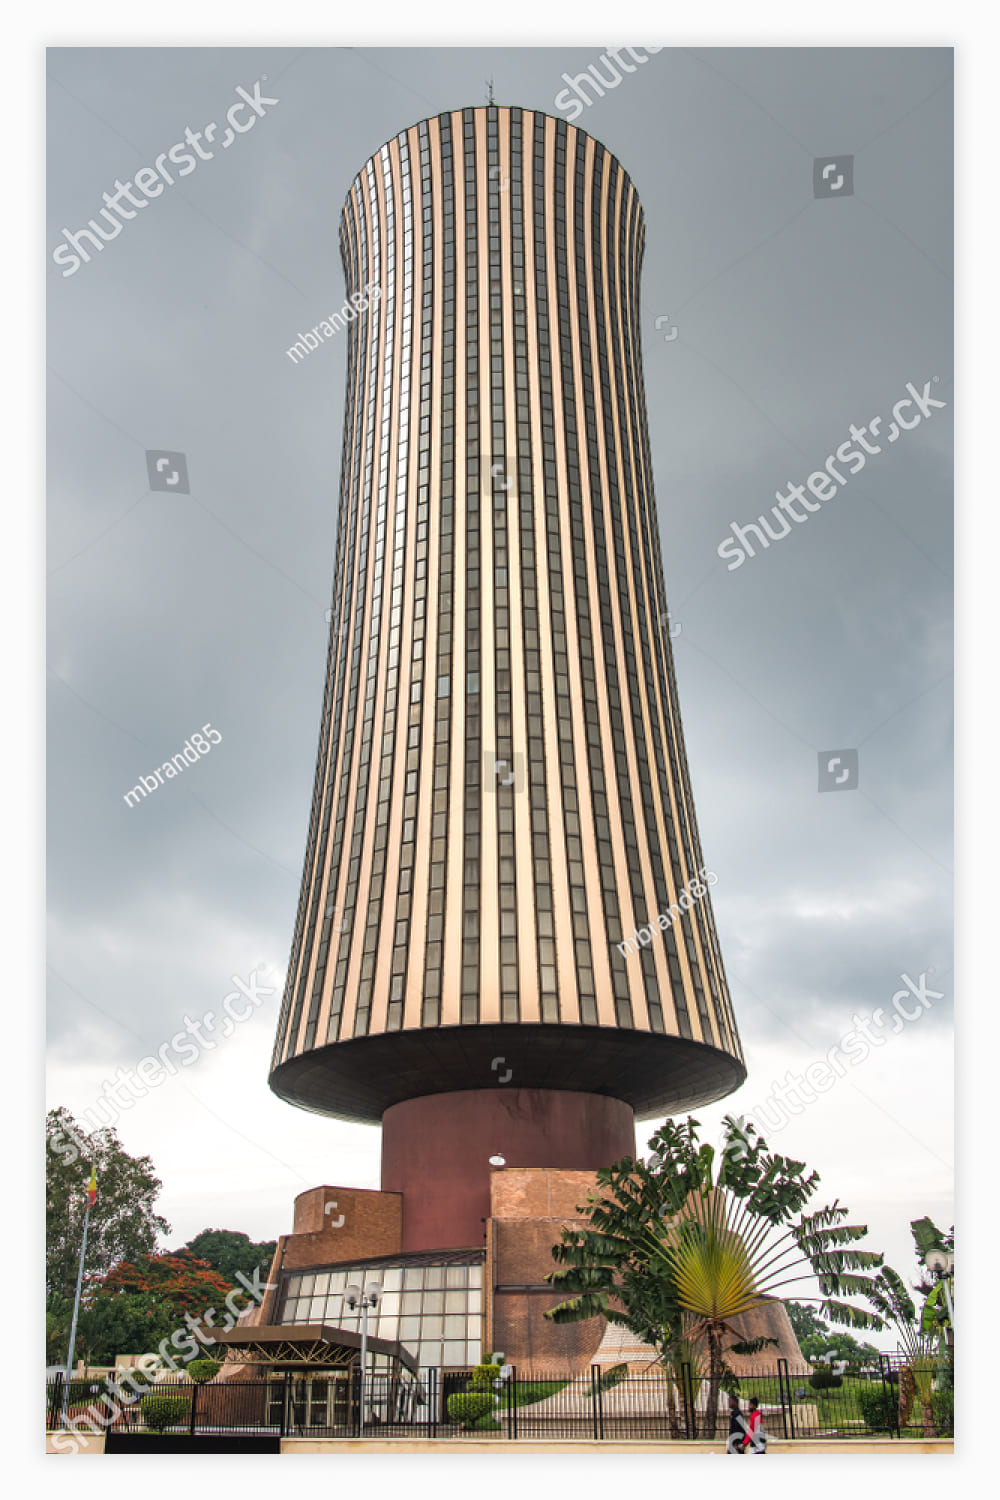 Nabemba Tower in Brazzaville downtown city center, Congo republic.